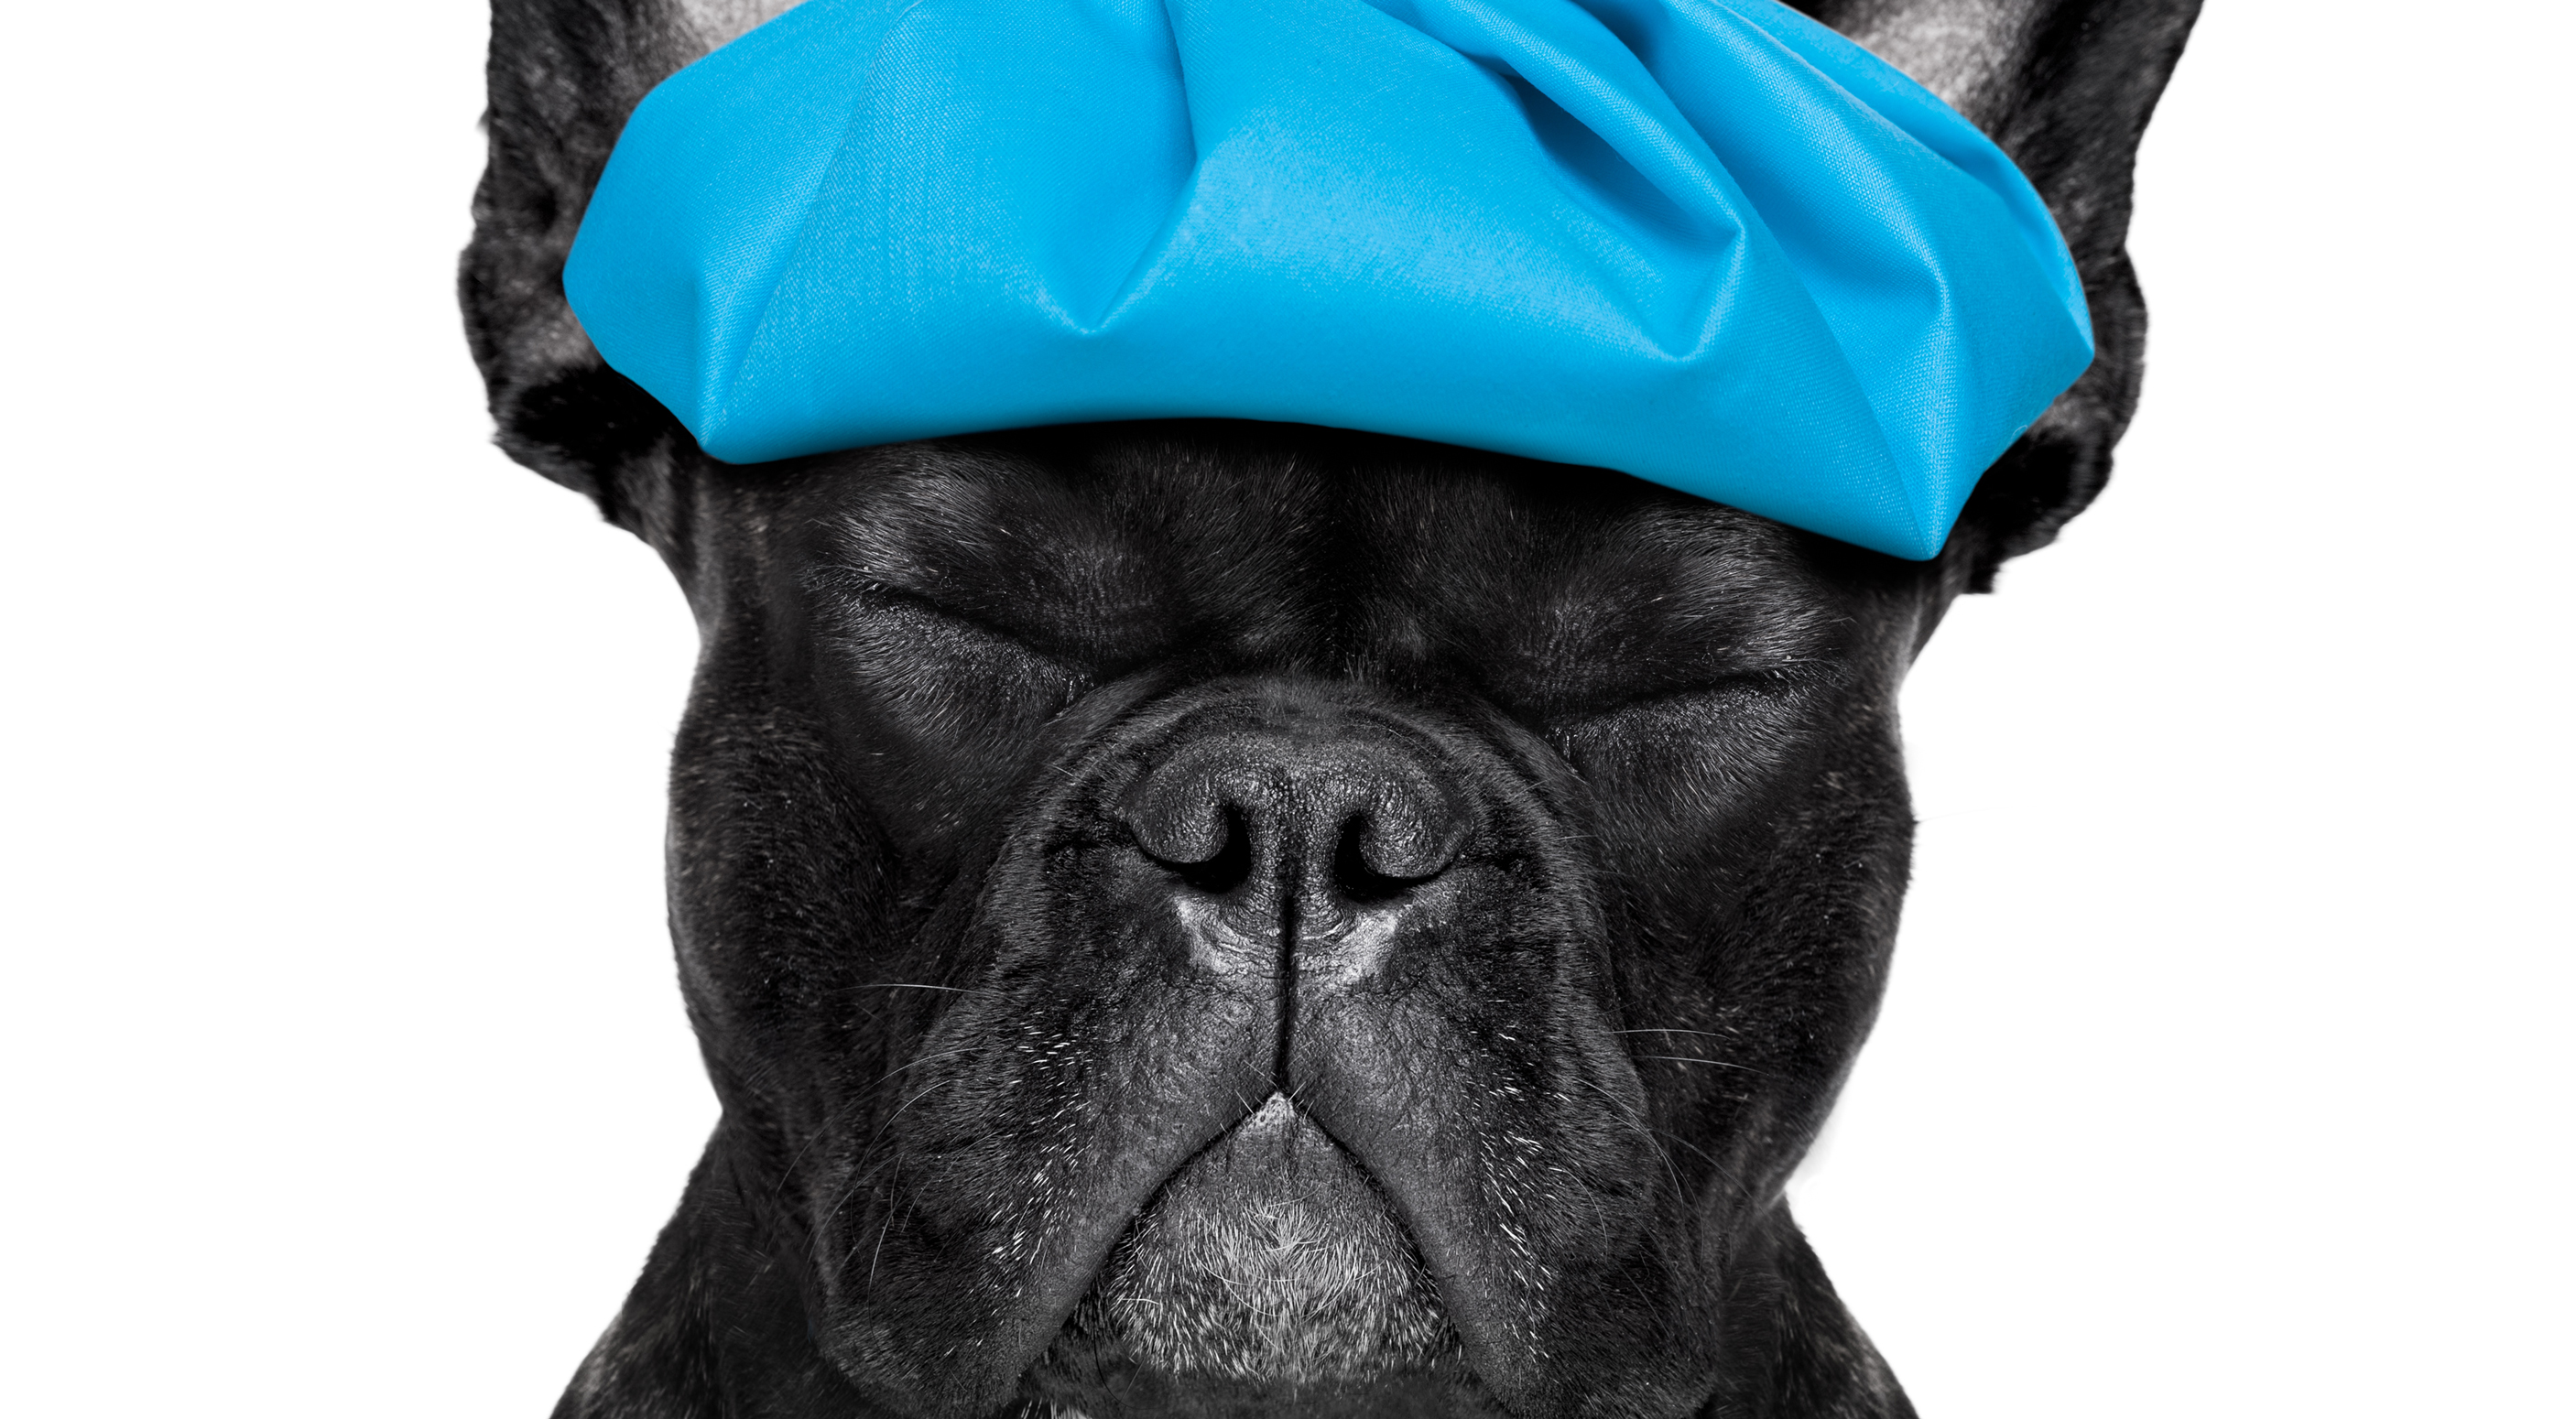 Dog with ice pack on head